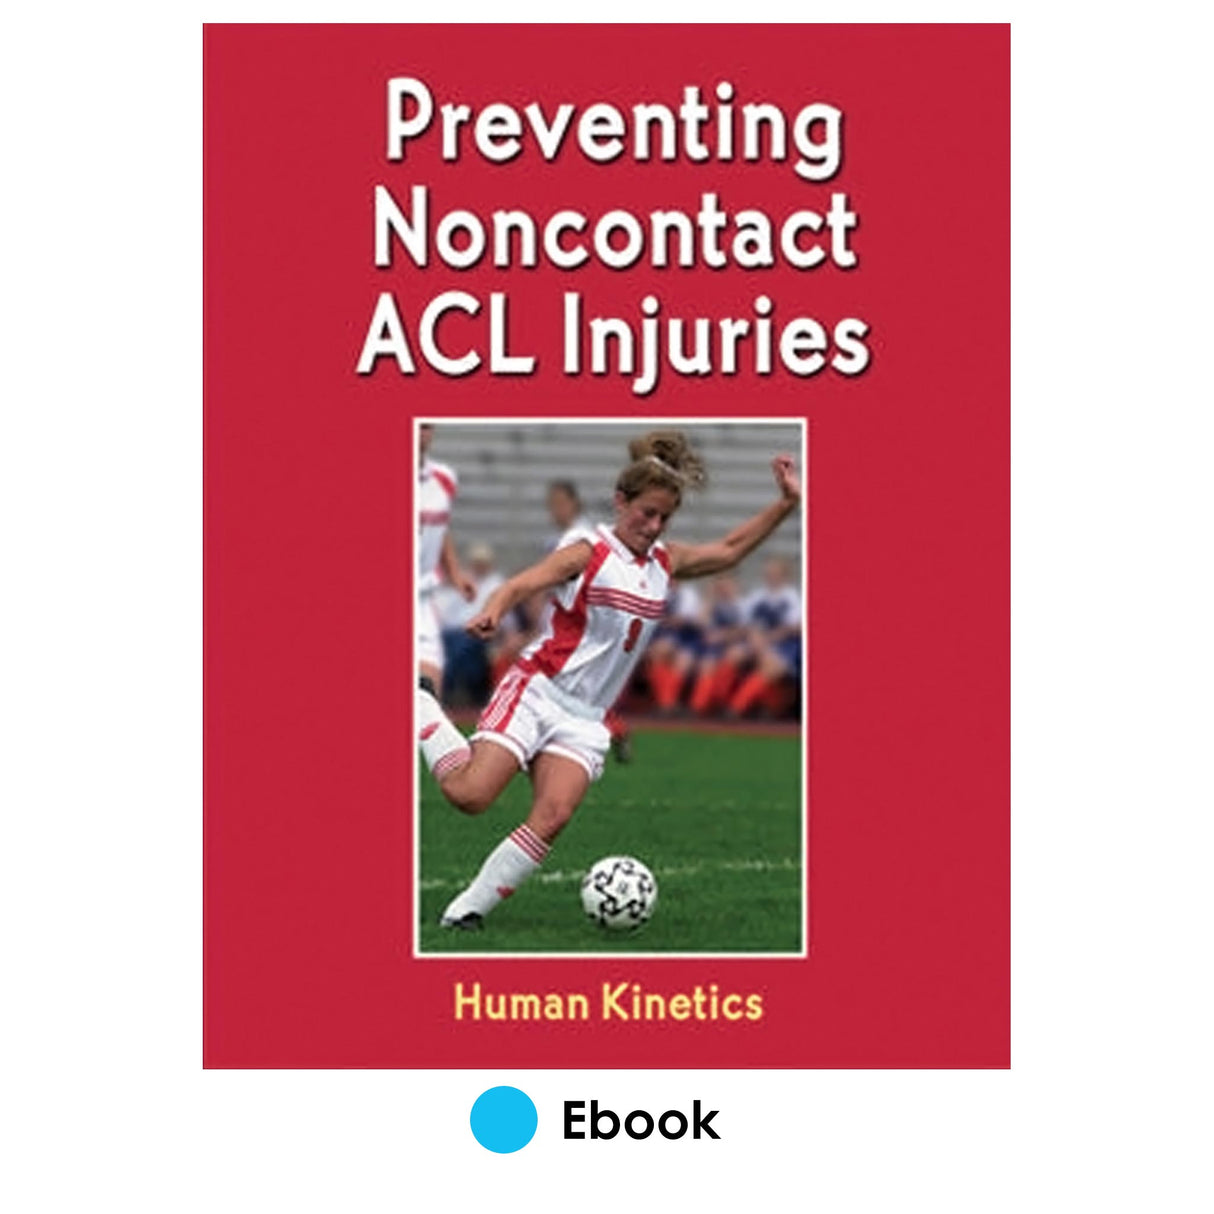 Preventing Noncontact ACL Injuries PDF